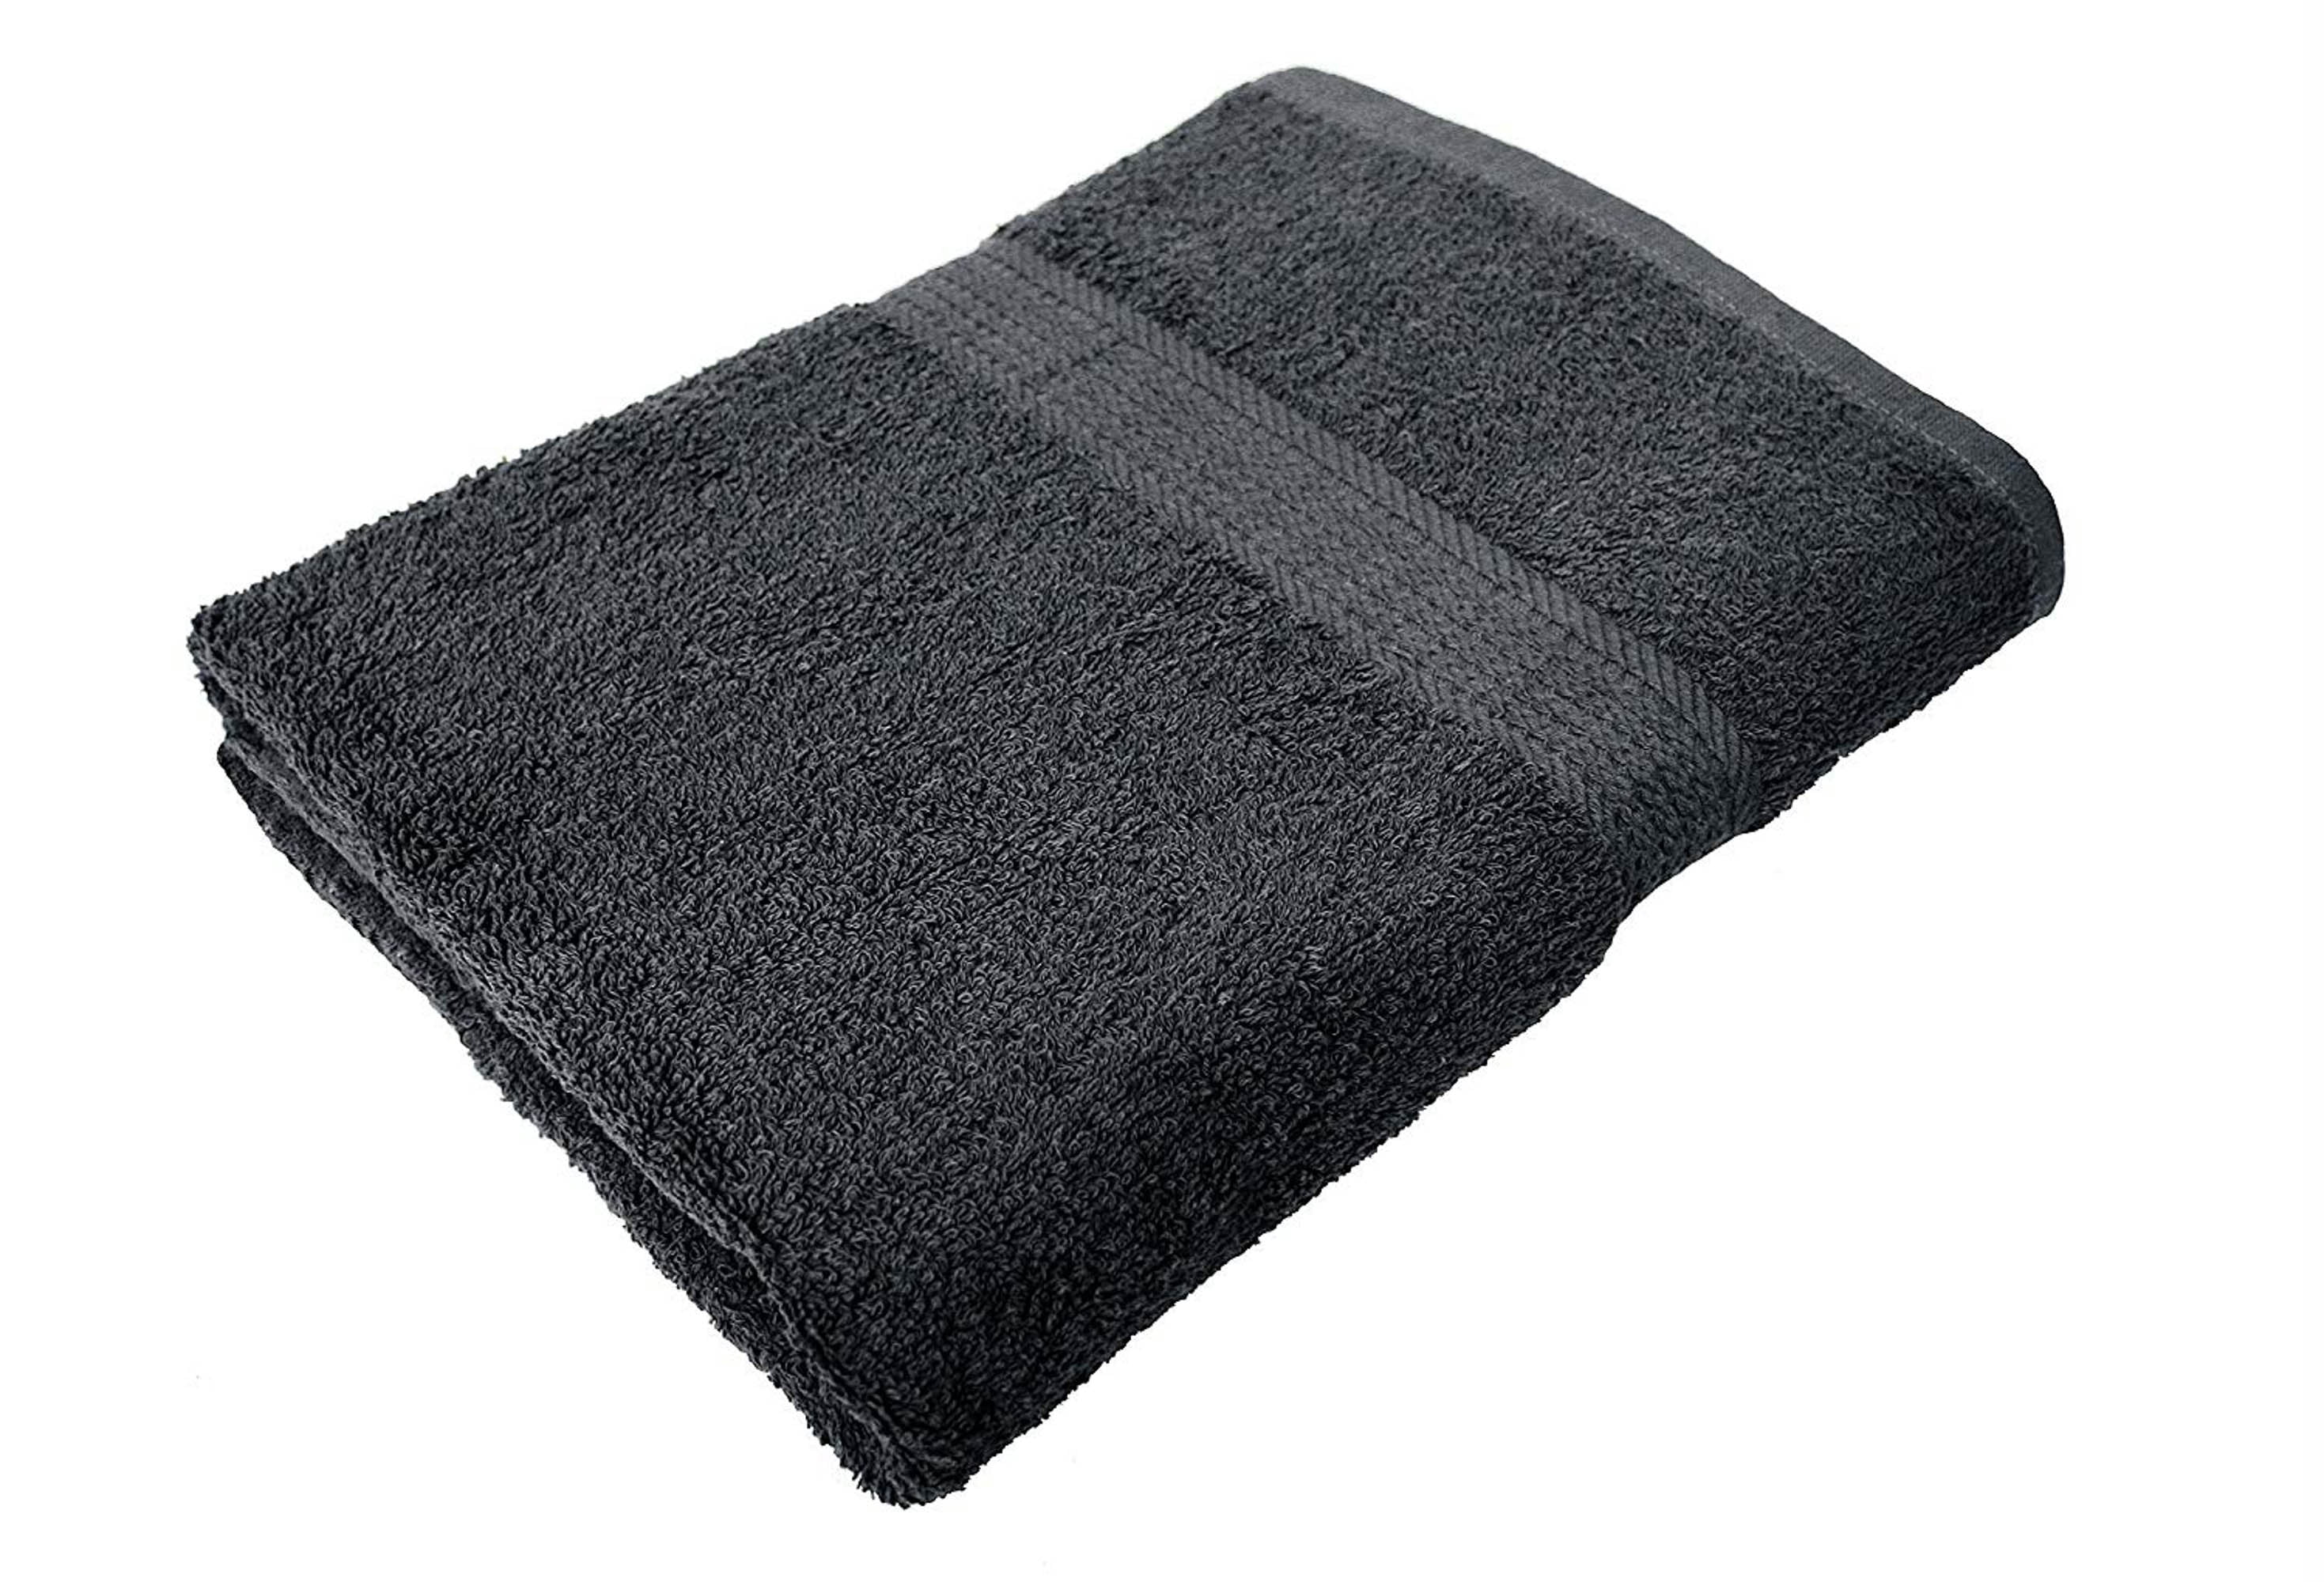  Microfiber Bath Towel Bath Sheets 2 Pack (32 x 71 Inch)  Oversized Extra Large Super Absorbent Quick Fast Drying Soft Eco-Friendly  Towels for Body Bathroom Travel (2PCS Grey) : Home & Kitchen